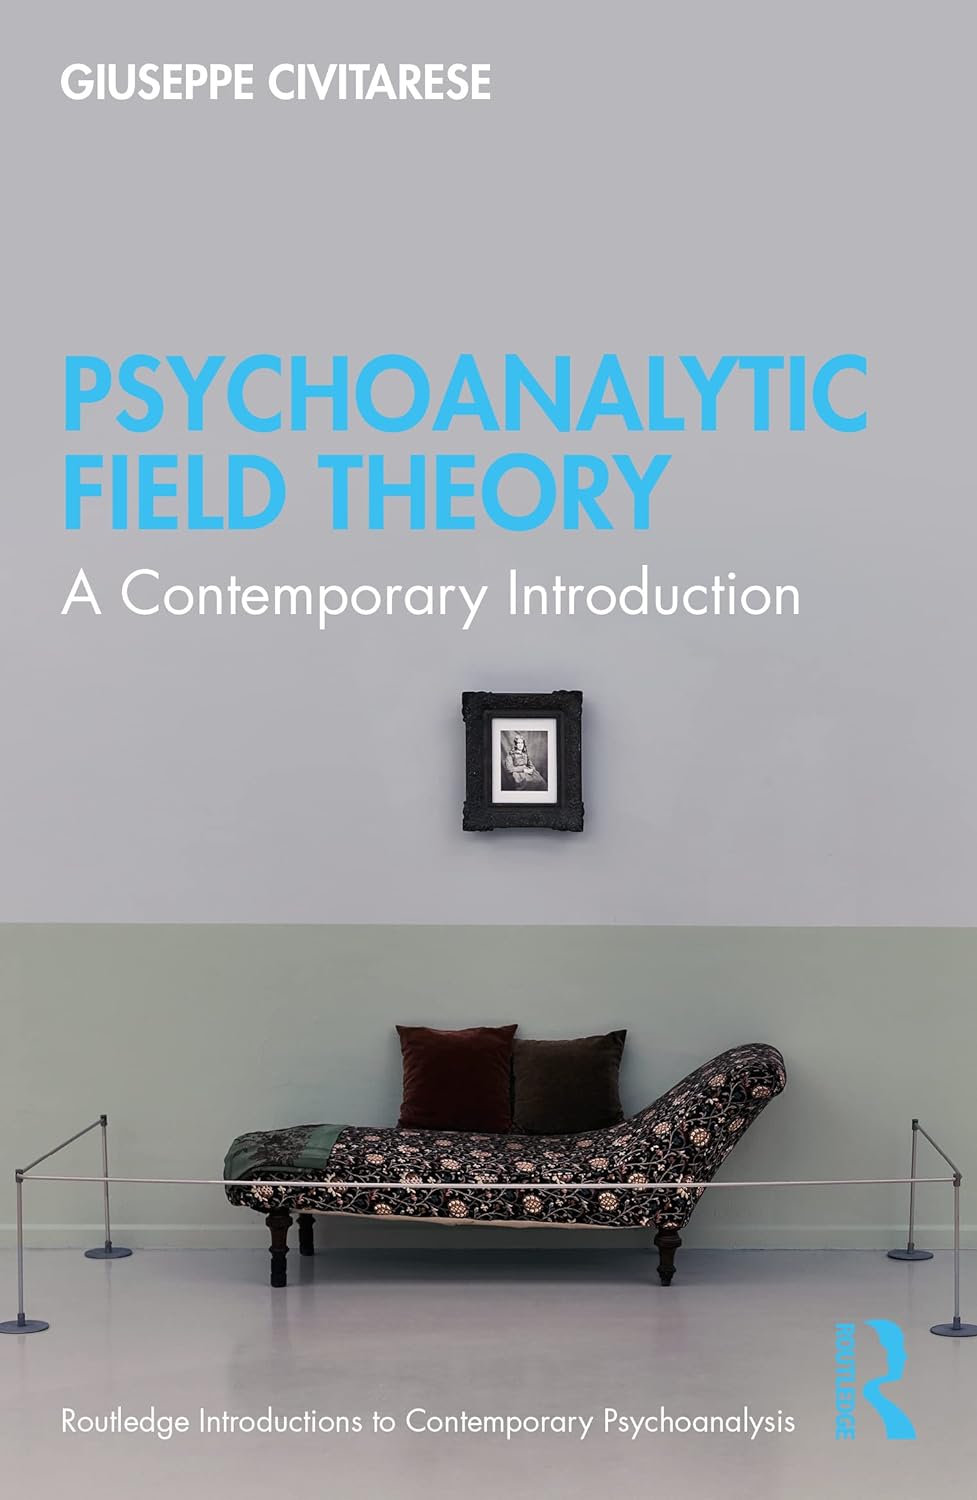 Psychoanalytic Field Theory (Routledge Introductions to Contemporary Psychoanalysis)  by  Giuseppe Civitarese 